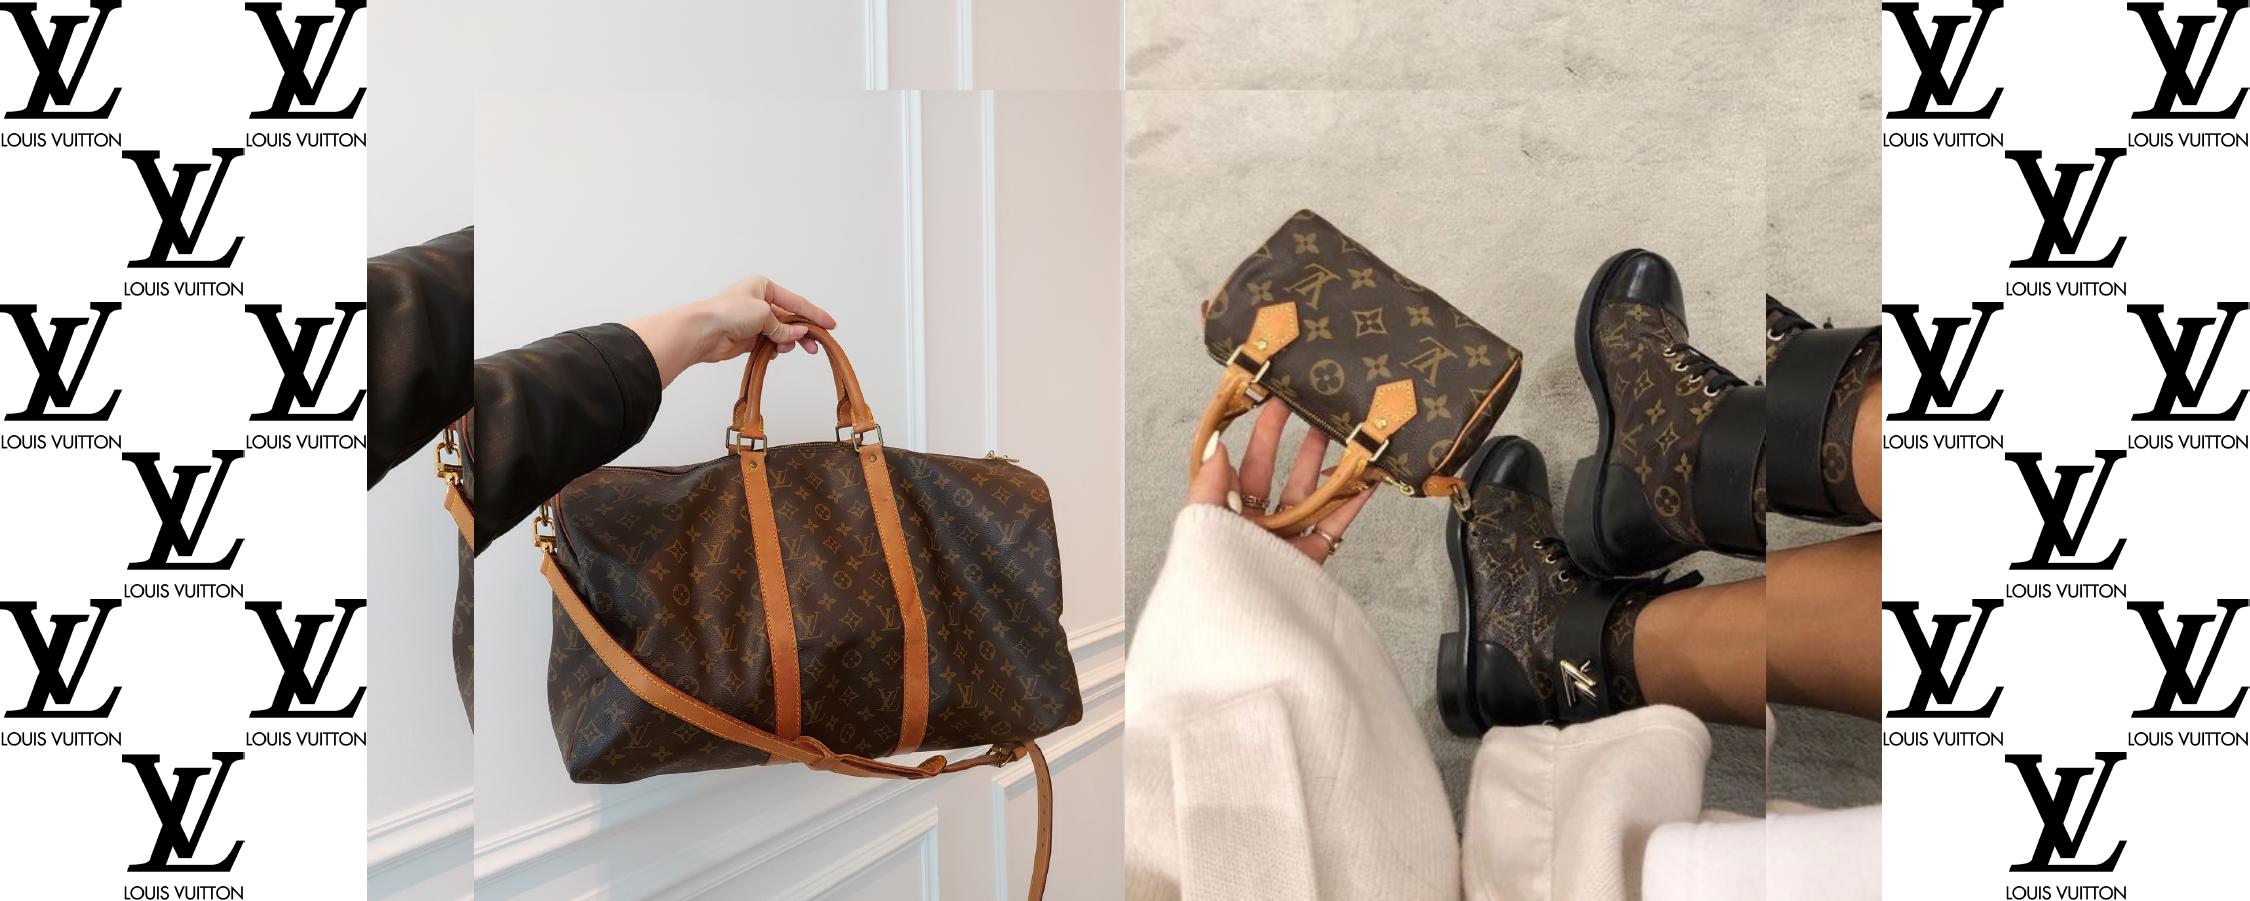 49083 Louis Vuitton Purse Stock Photos HighRes Pictures and Images   Getty Images